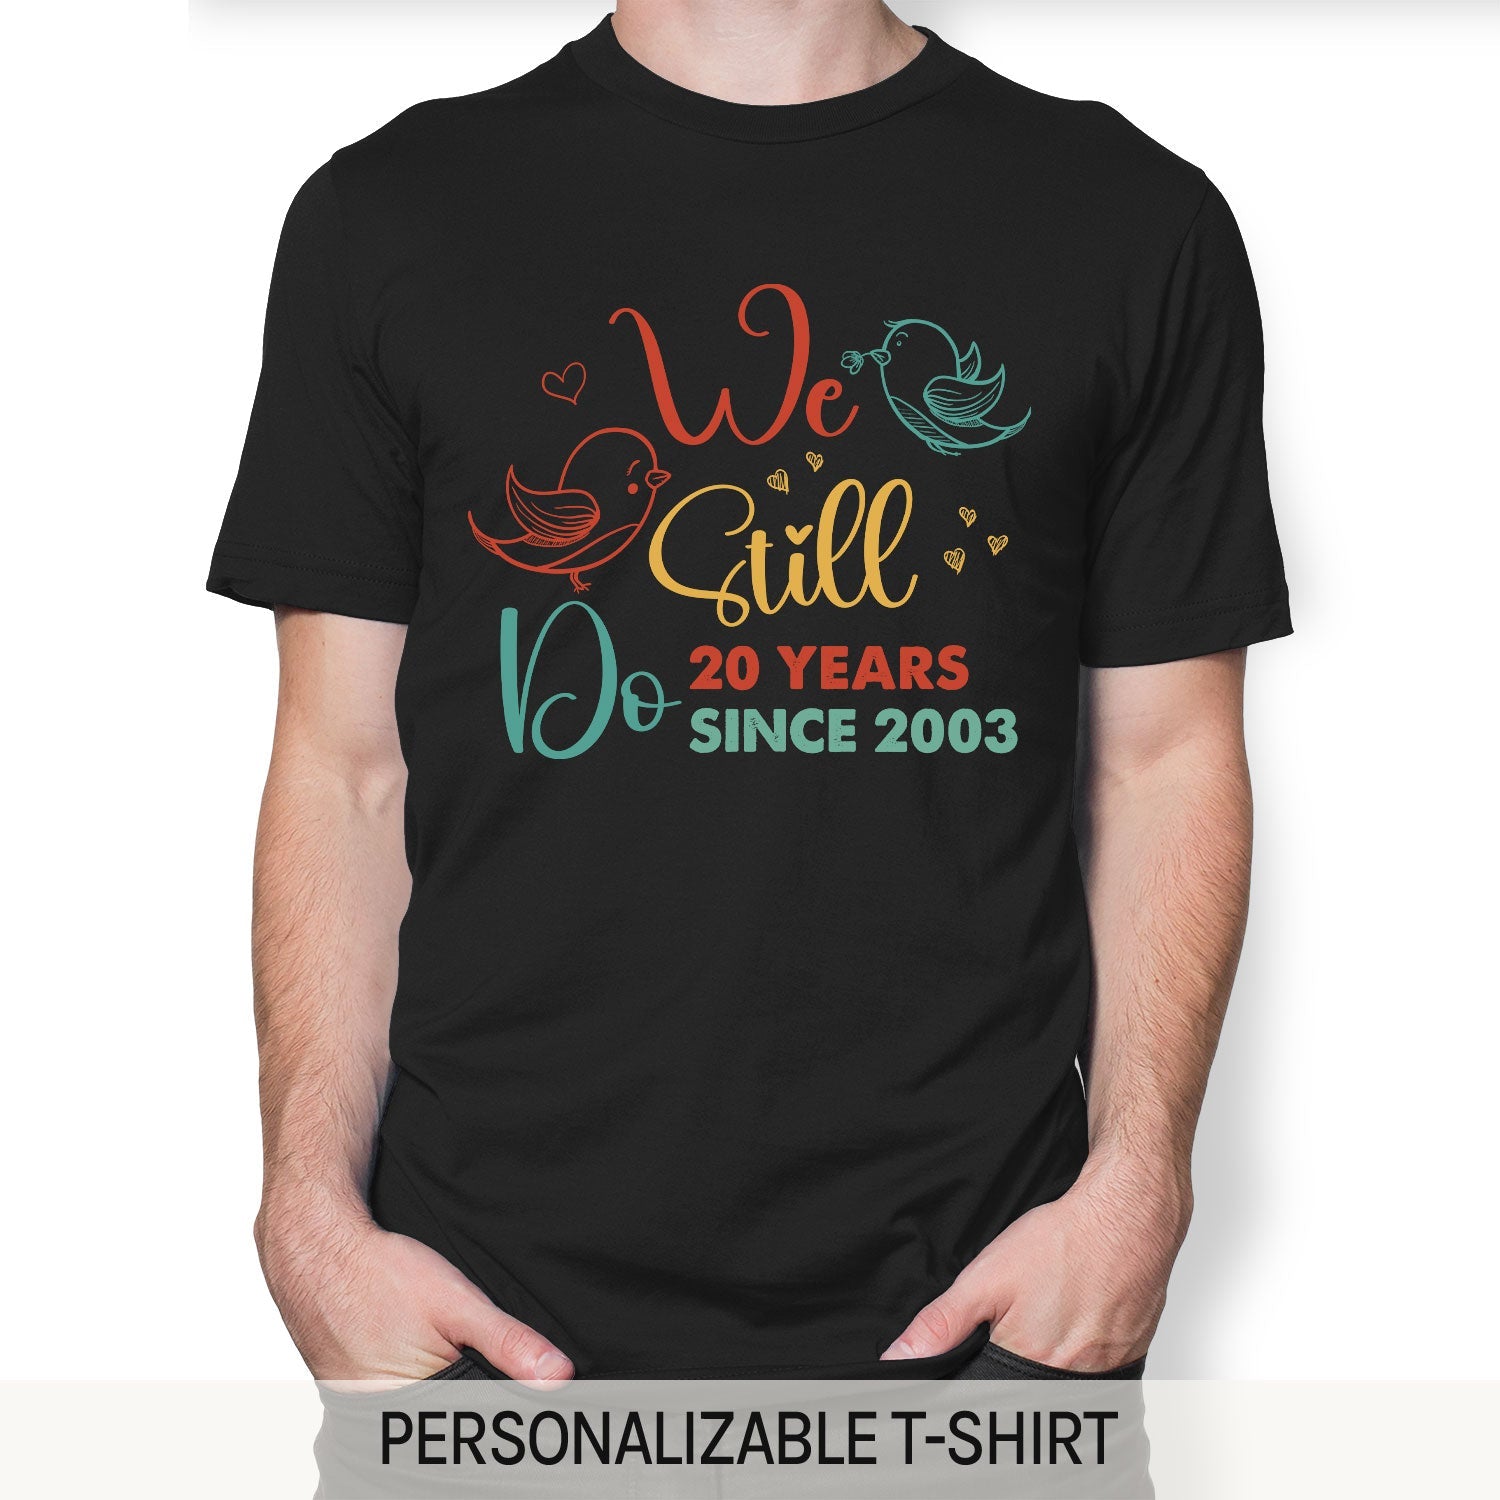 We Still Do - Personalized 15 Year Anniversary gift for Husband or Wife - Custom Tshirt - MyMindfulGifts